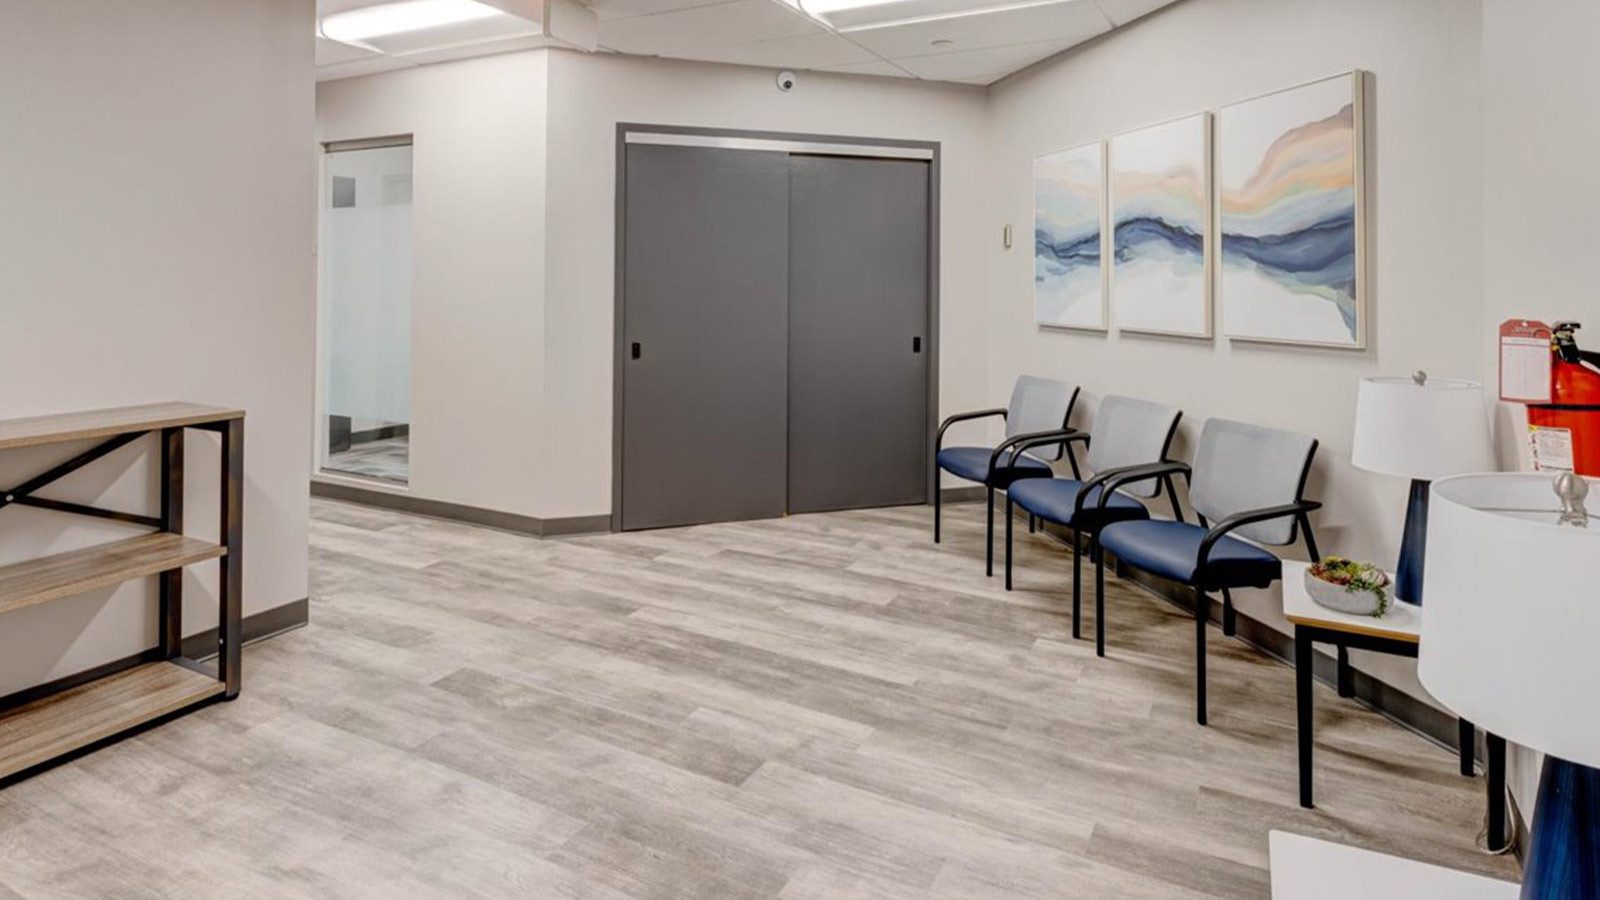 A clean and bright waiting area with chairs lined against the wall.